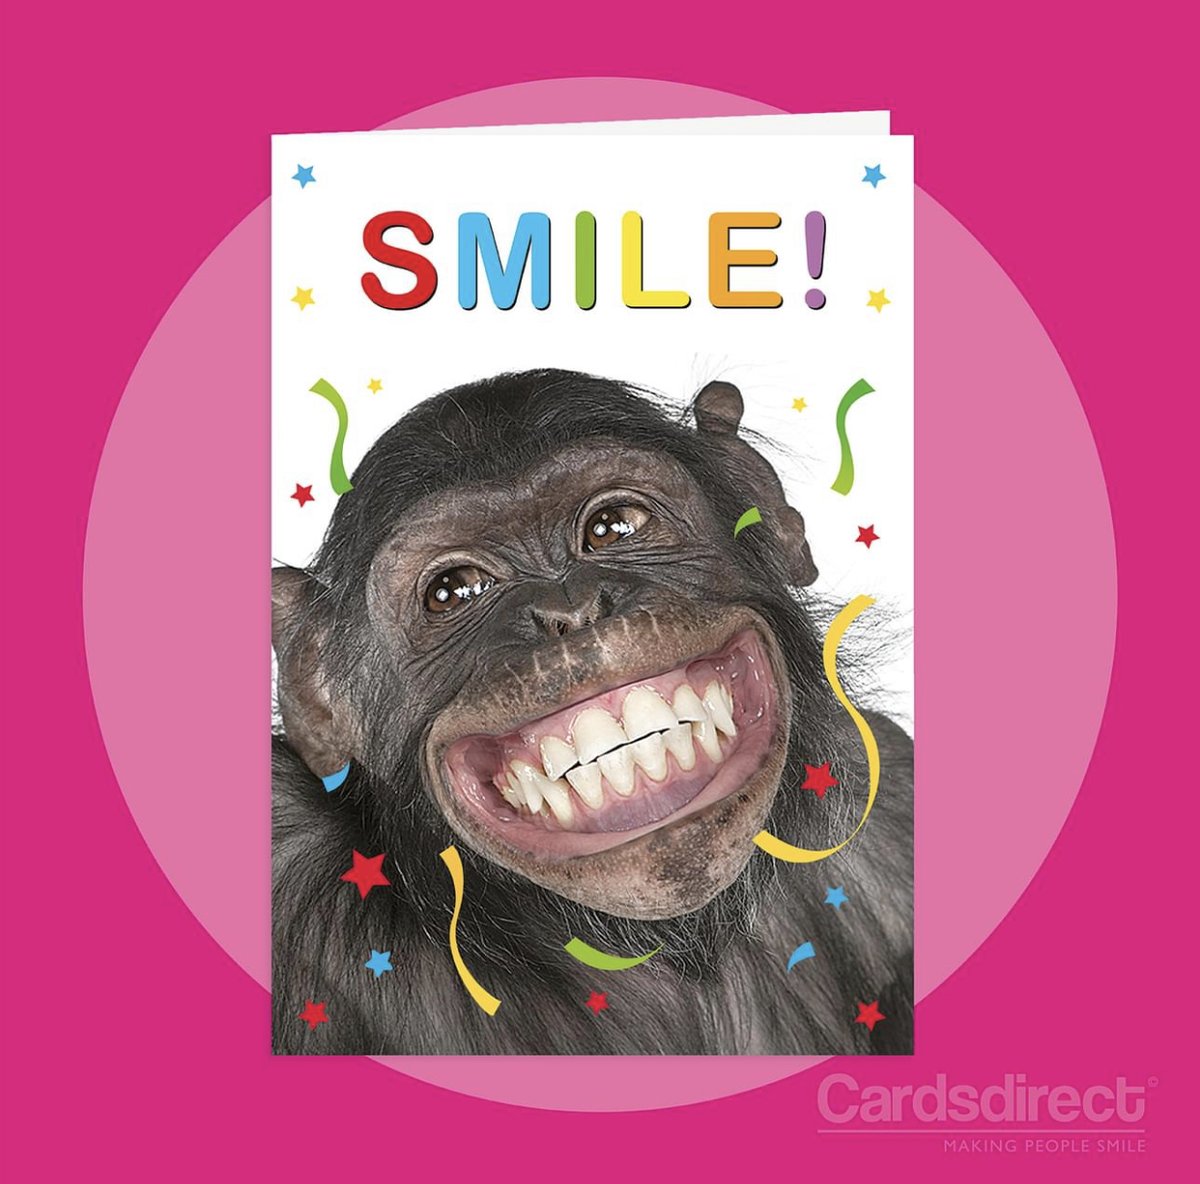 Make someone you know smile this January, with @CardsDirectUK. 😁

#JustBecause #HighChelmer #CardsDirect #Smile